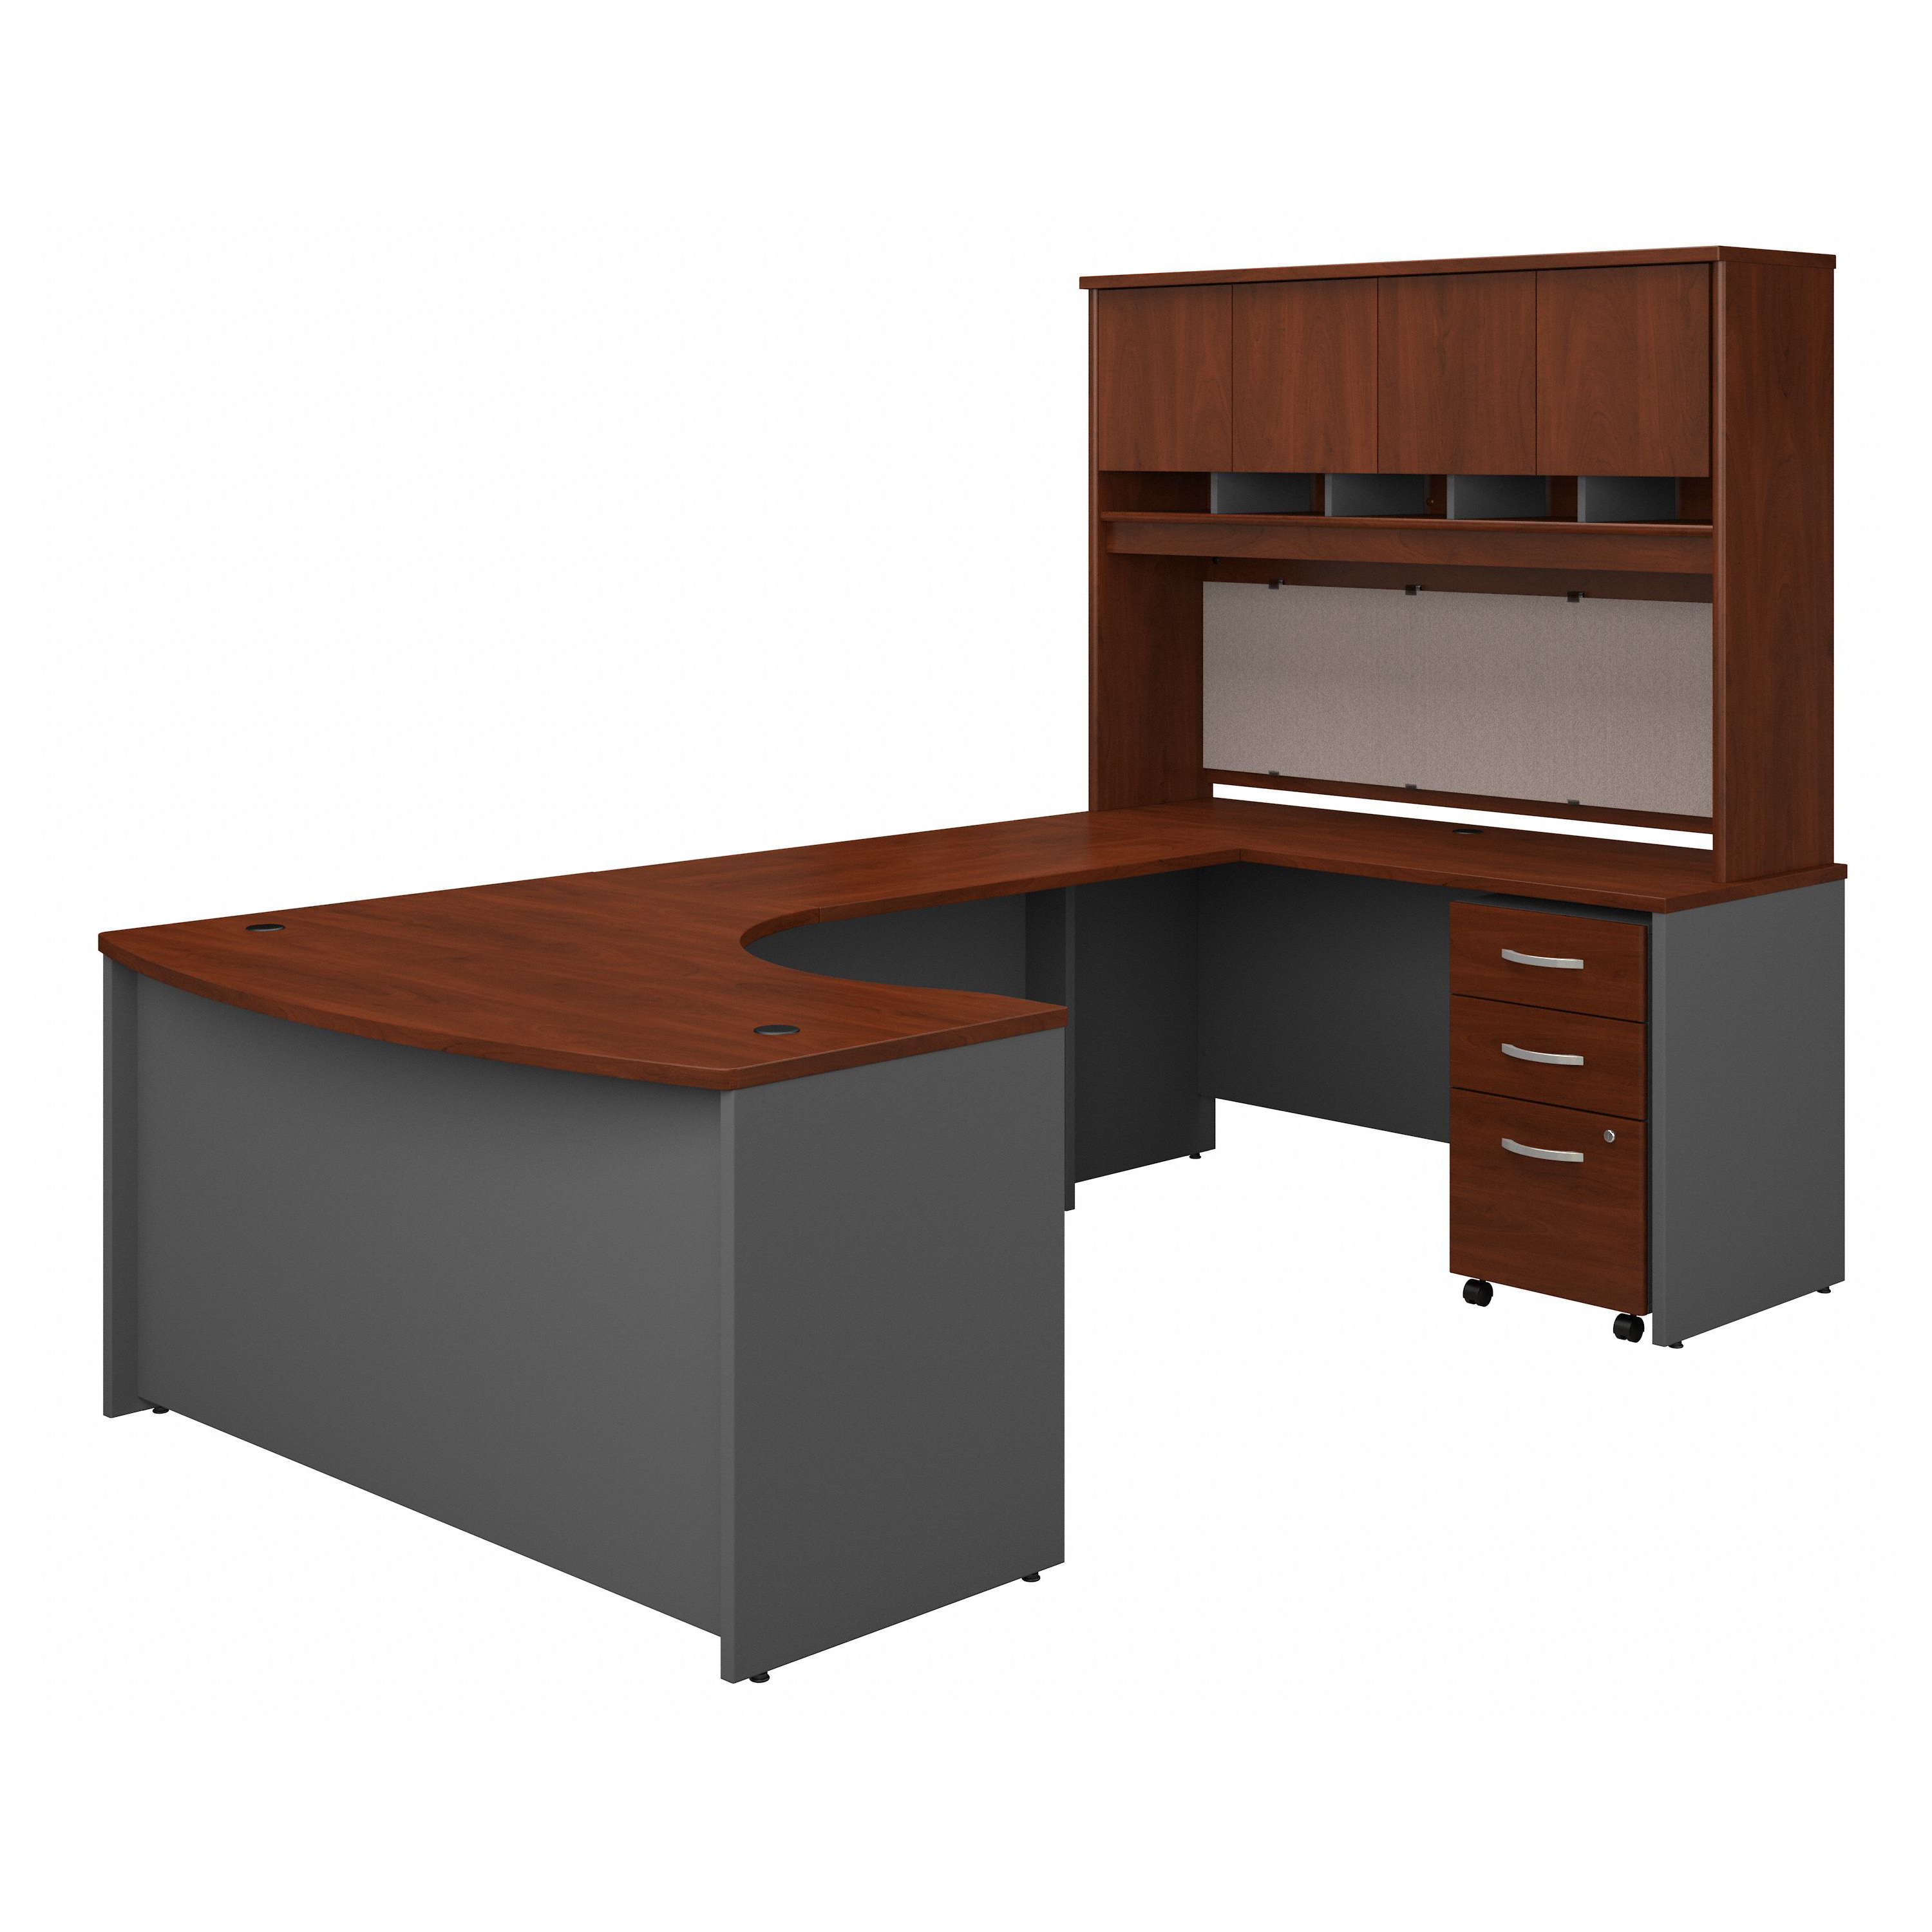 Shop Bush Business Furniture Series C 60W Right Handed Bow Front U Shaped Desk with Hutch and Storage 02 SRC092HCSU #color_hansen cherry/graphite gray